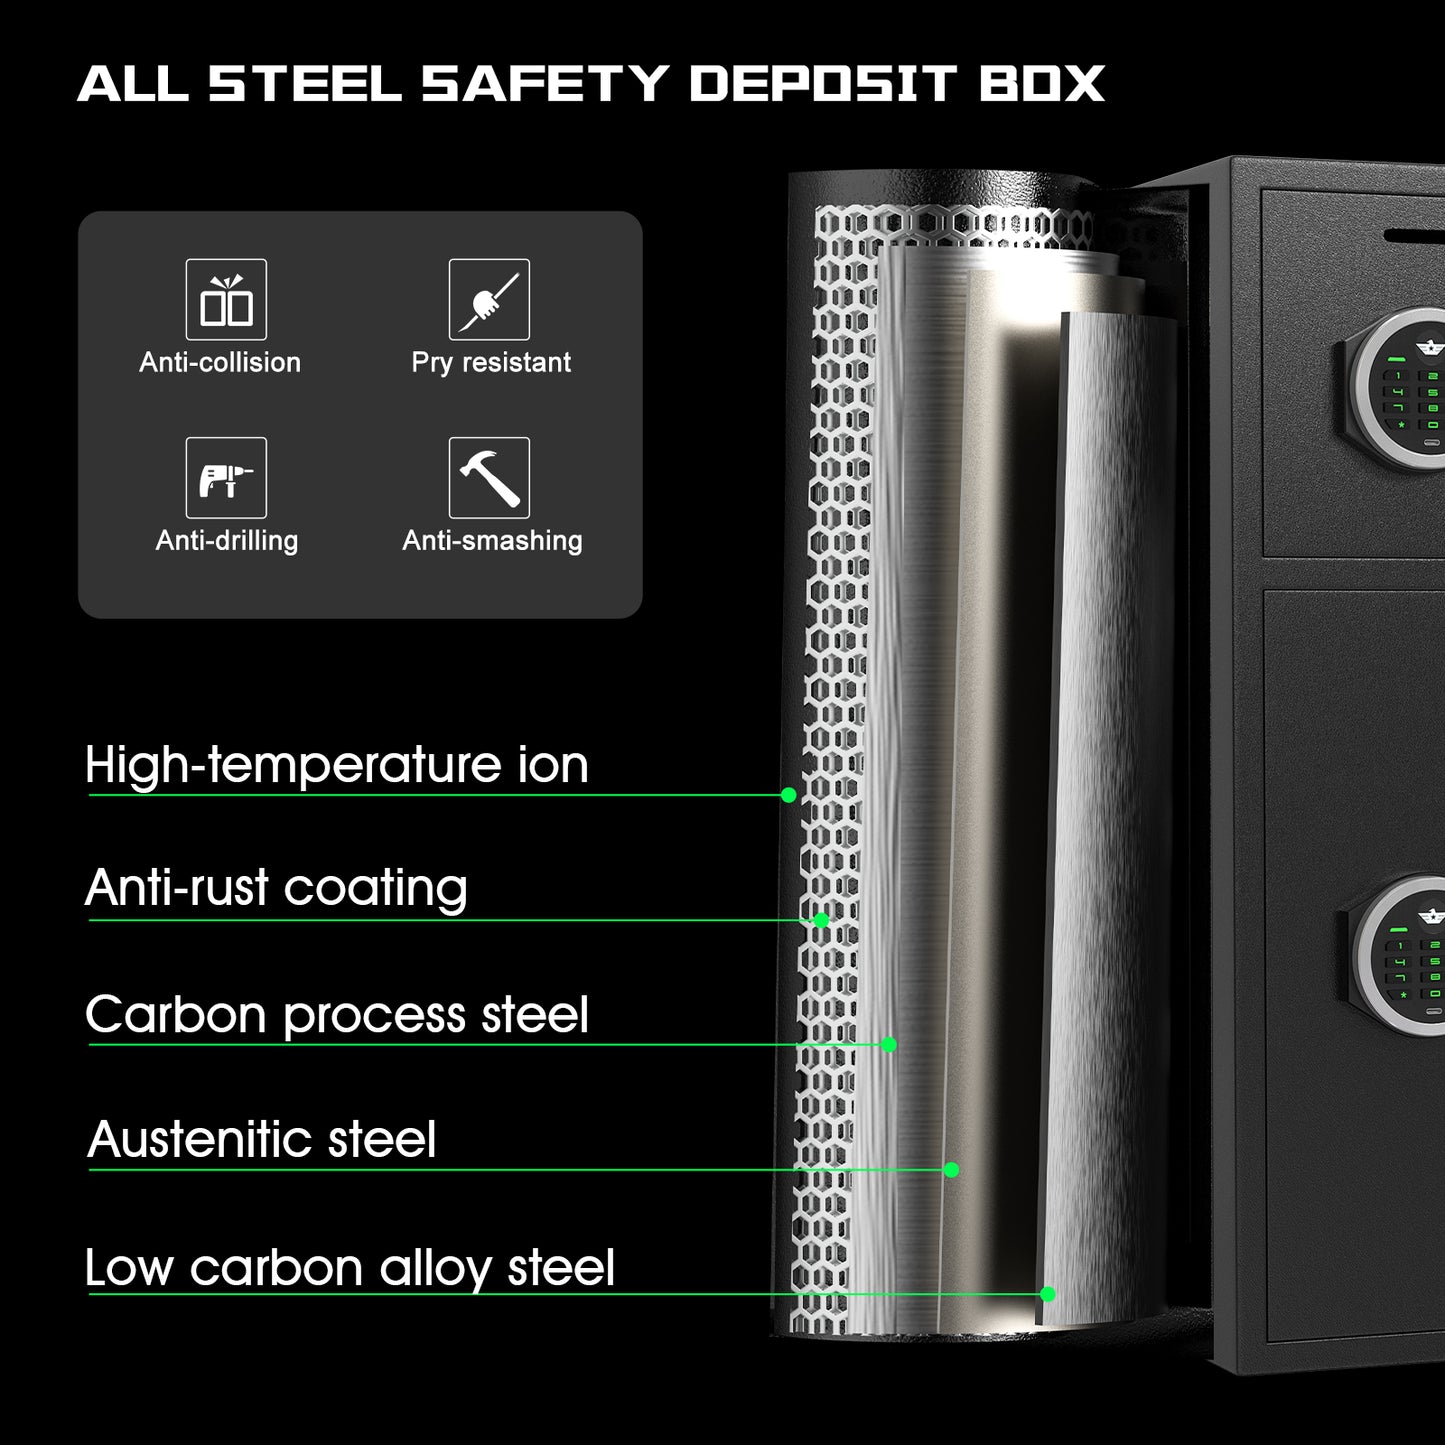 WY KM-75  6.5 Cub Fireproof Safe Box, Heavy Duty Large Safe with Dual Alarm System, Home Safe with Deposit Slot and Backlit Keyboard